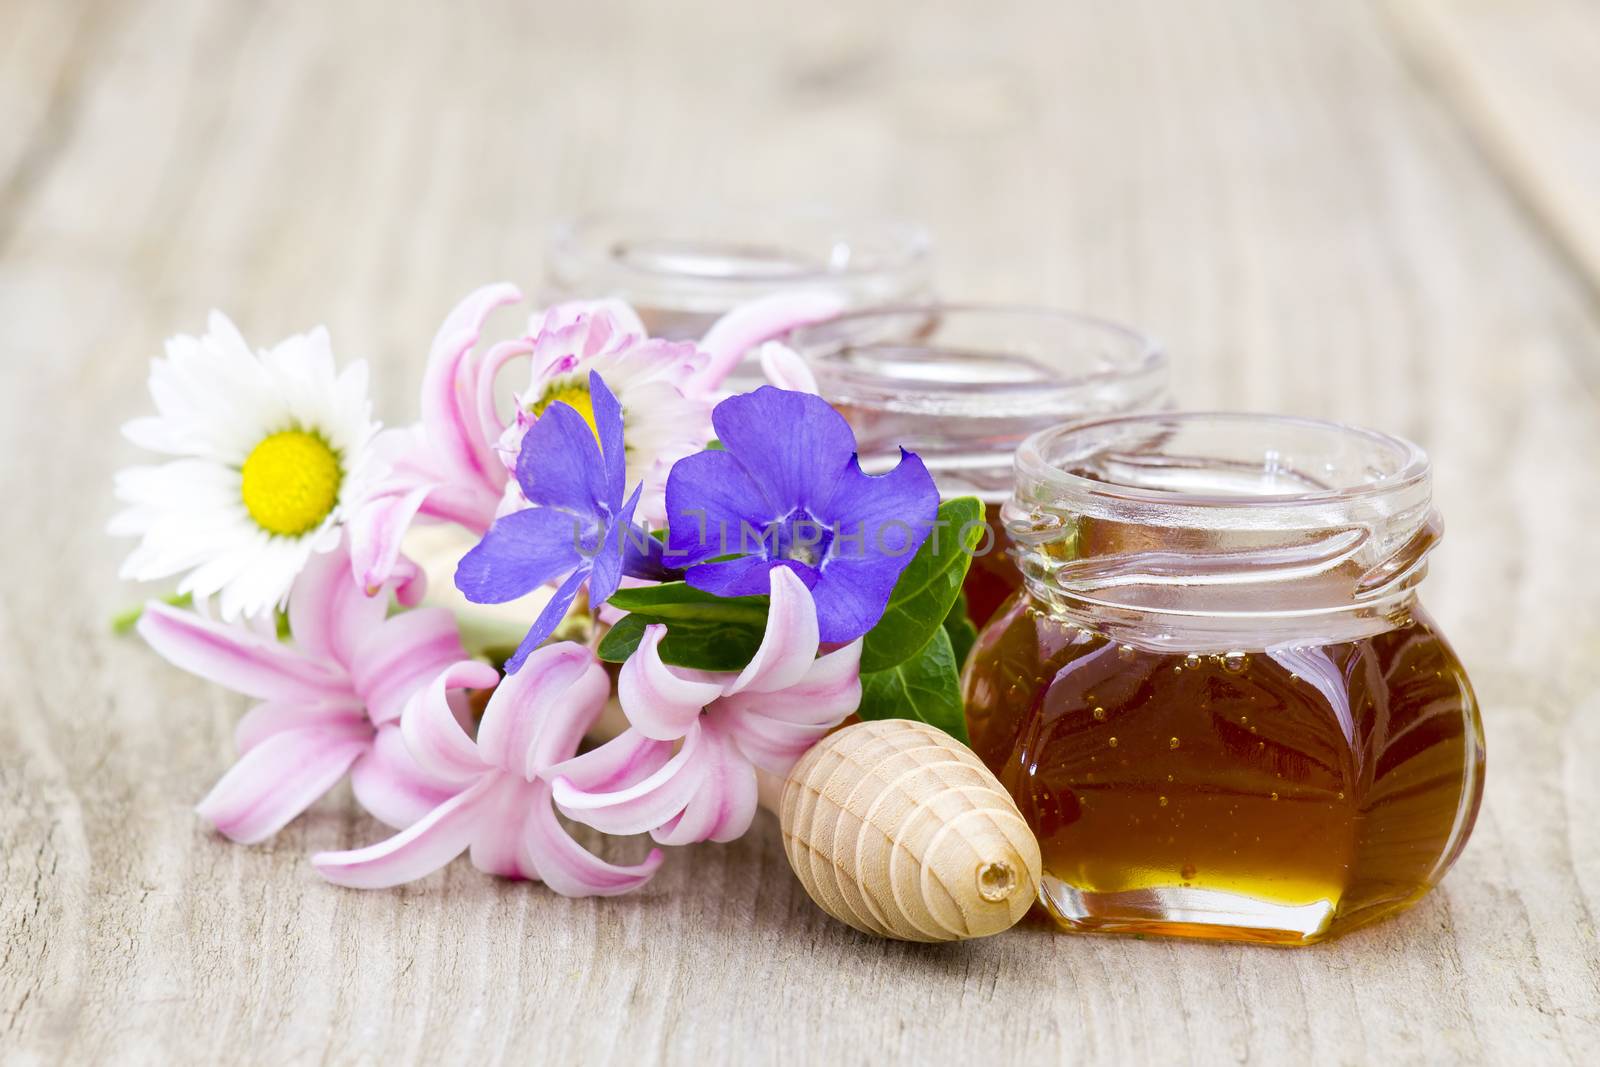 Honey in jars, flowers and honey dipper on wooden background